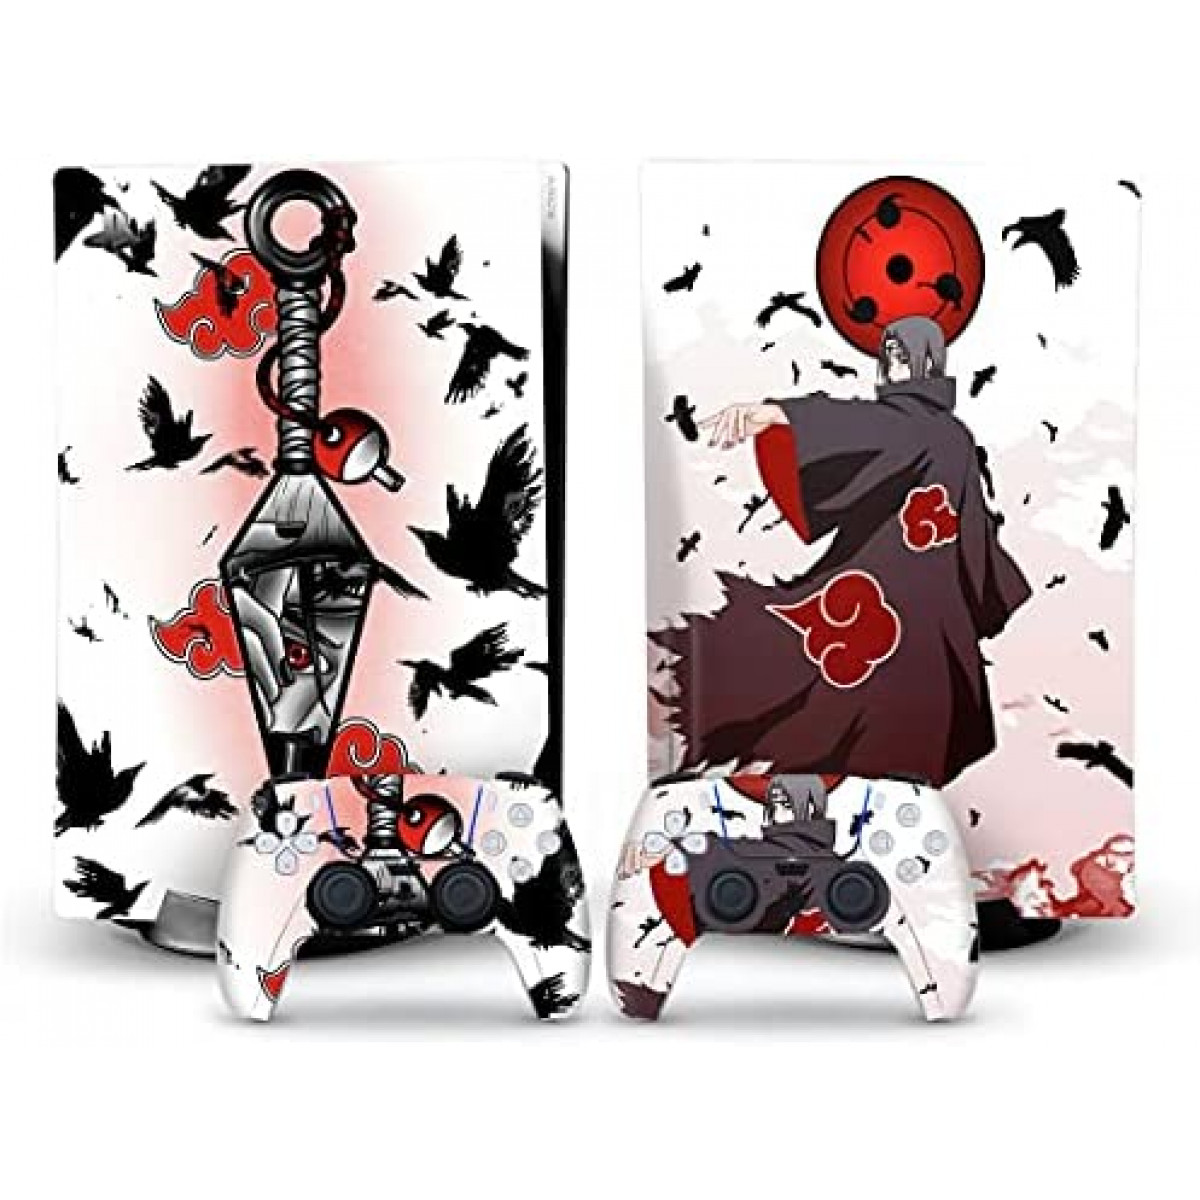 Skin For Ps5 Disc Edition Anime Console And Controller Accessories Cover  Skins Wraps Fan Art Design For Playstation 5 Disc Version - Imported  Products from USA - iBhejo